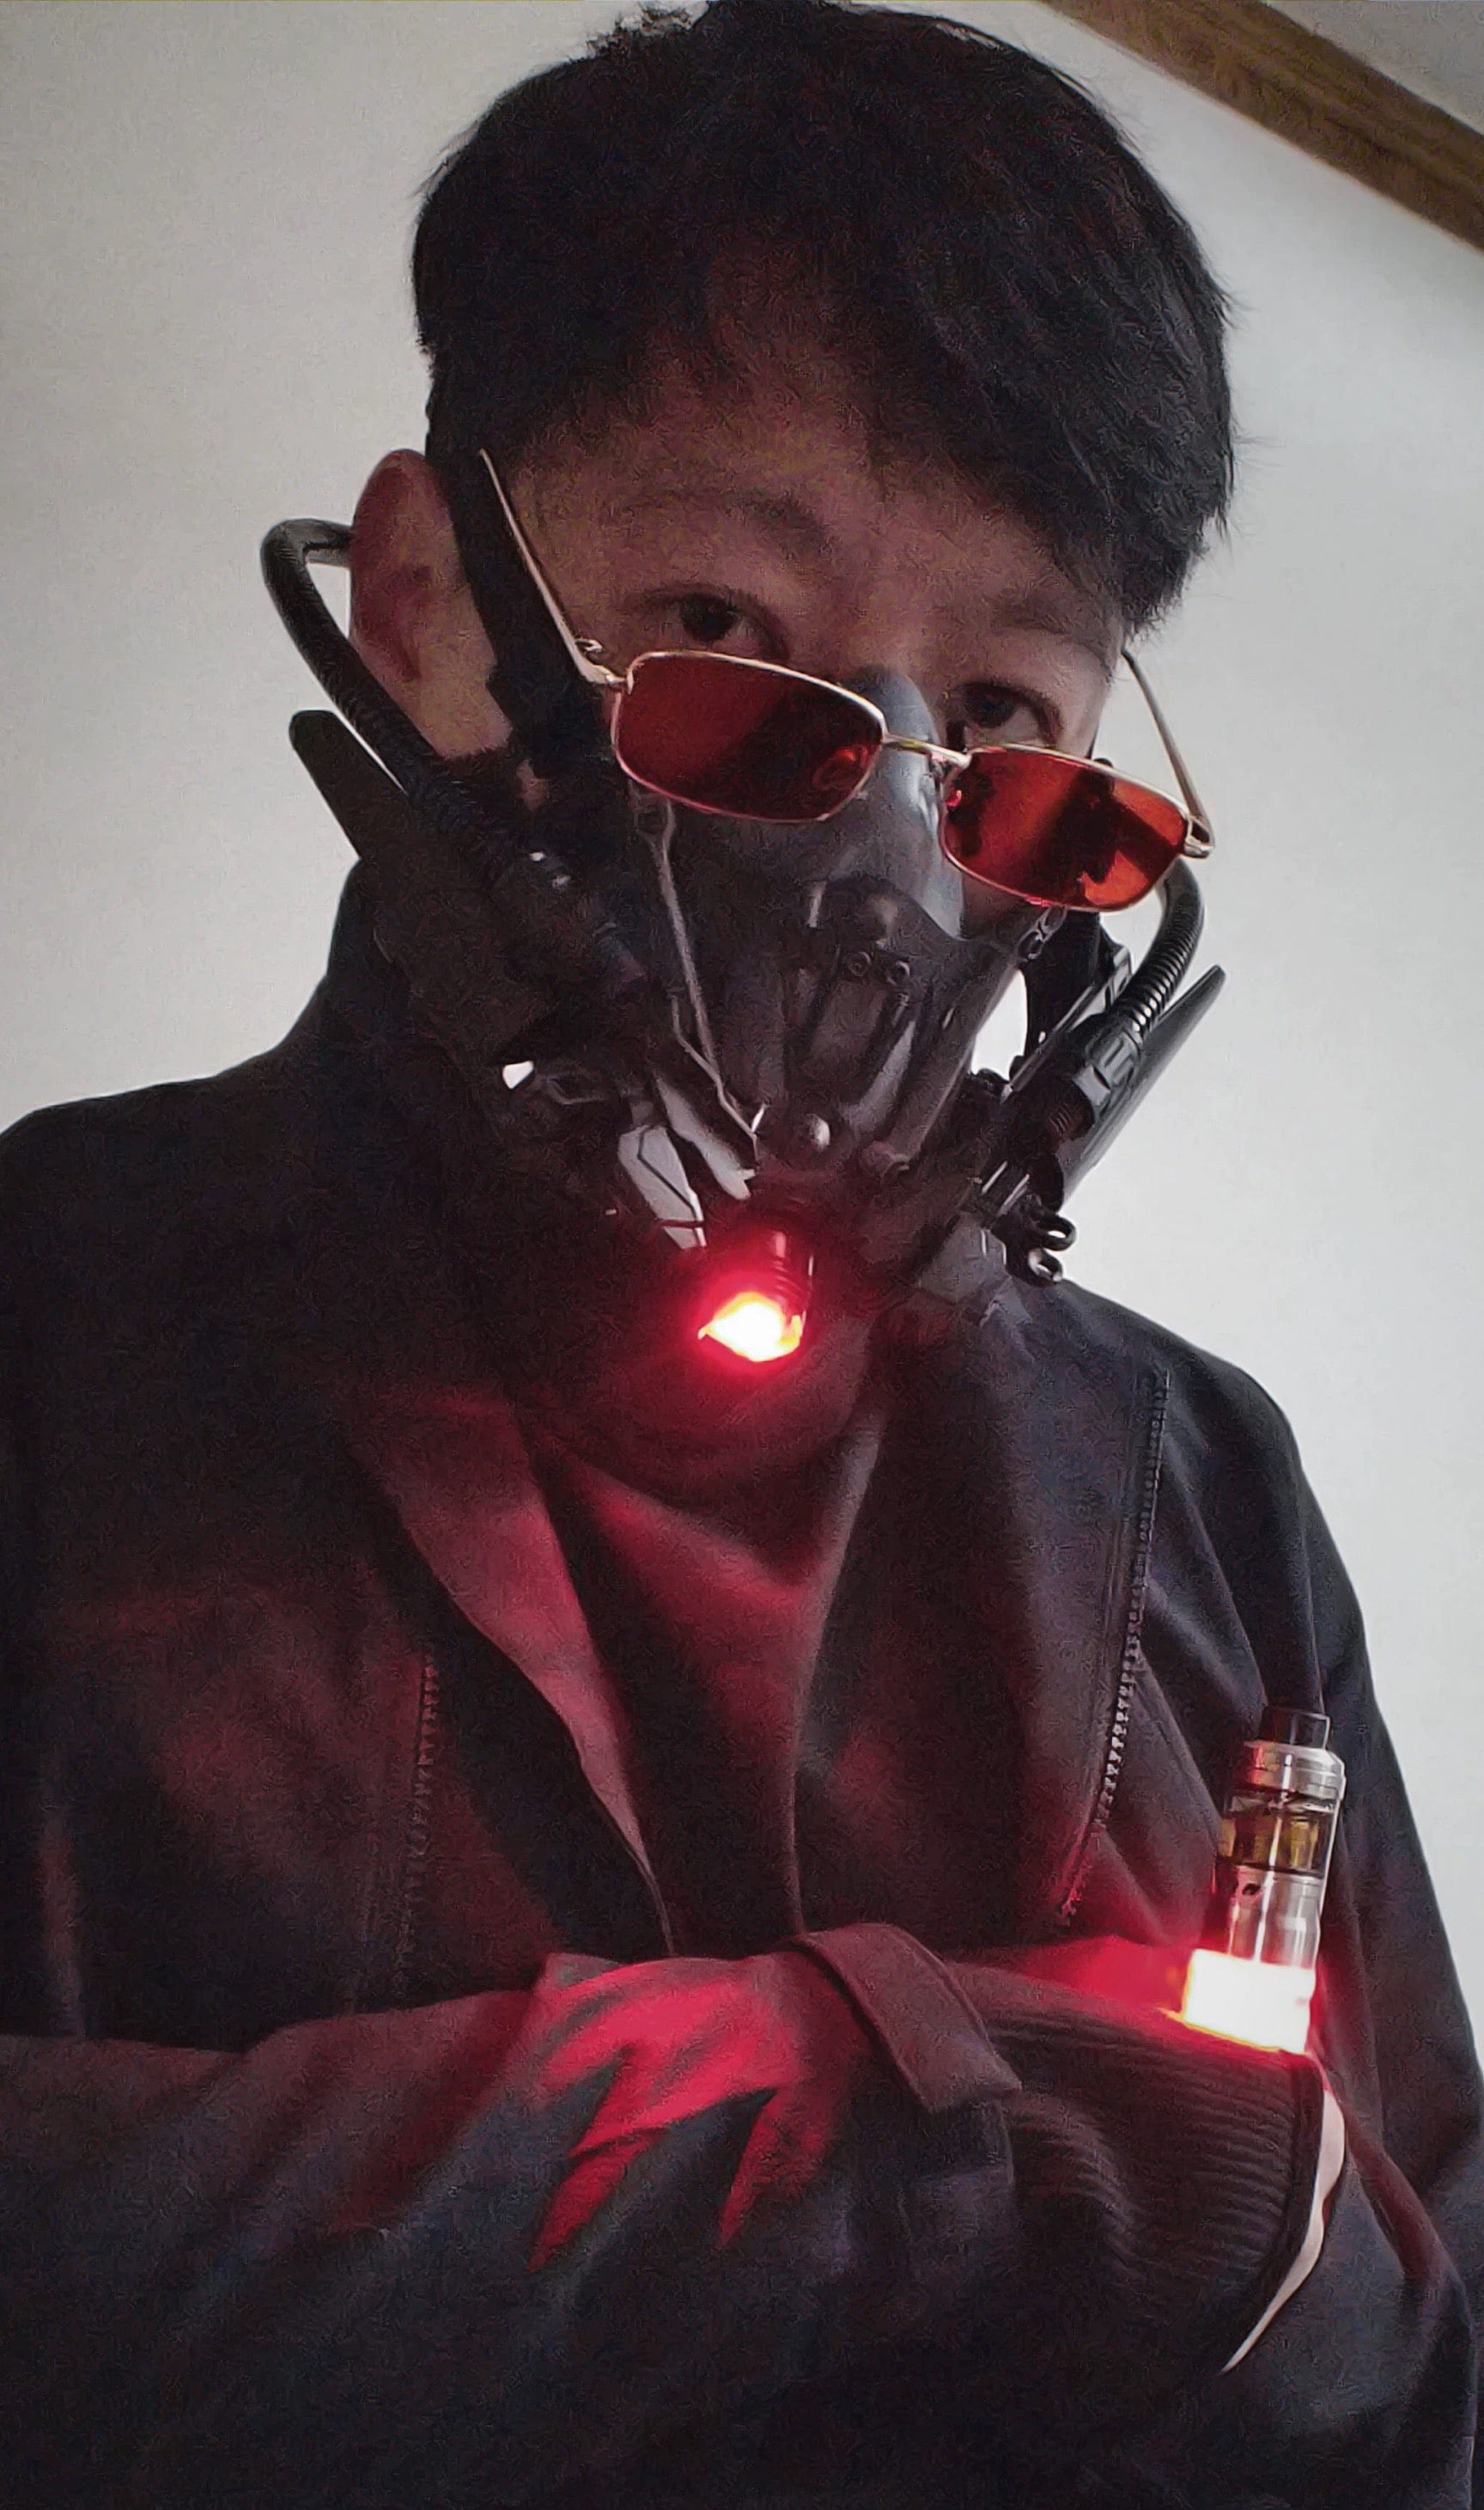 GiftsBite Store Electronic Cyberpunk Lower Face Smoke Breathing Cosplay Mask 3256803864811162-Red light